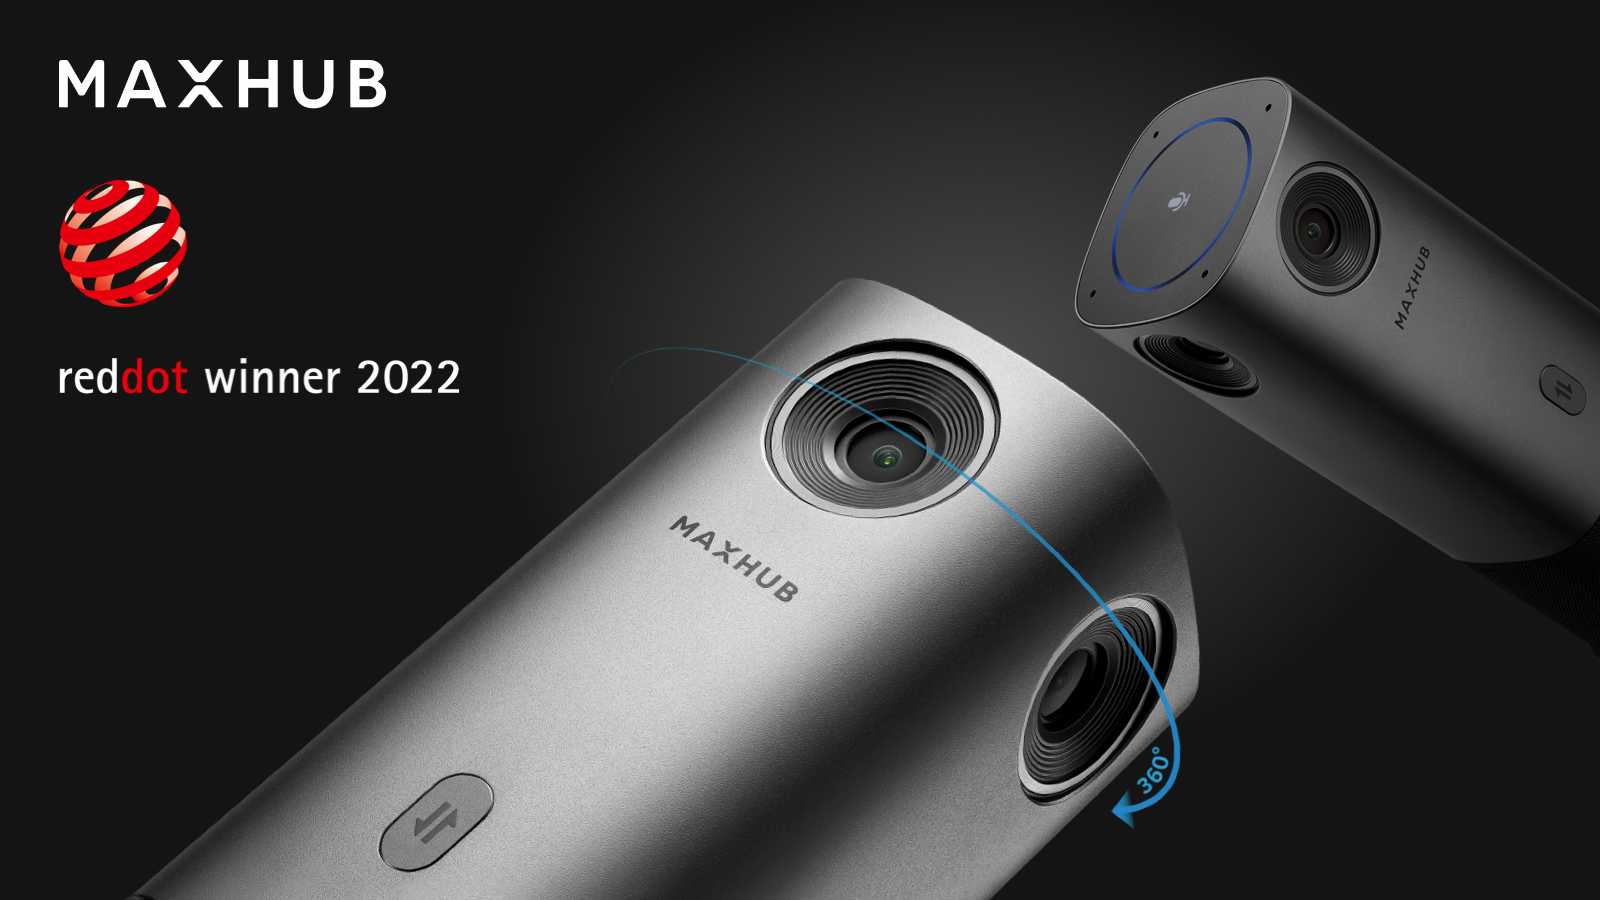 The MAXHUB UC M40 camera receives the Red Dot Design Award